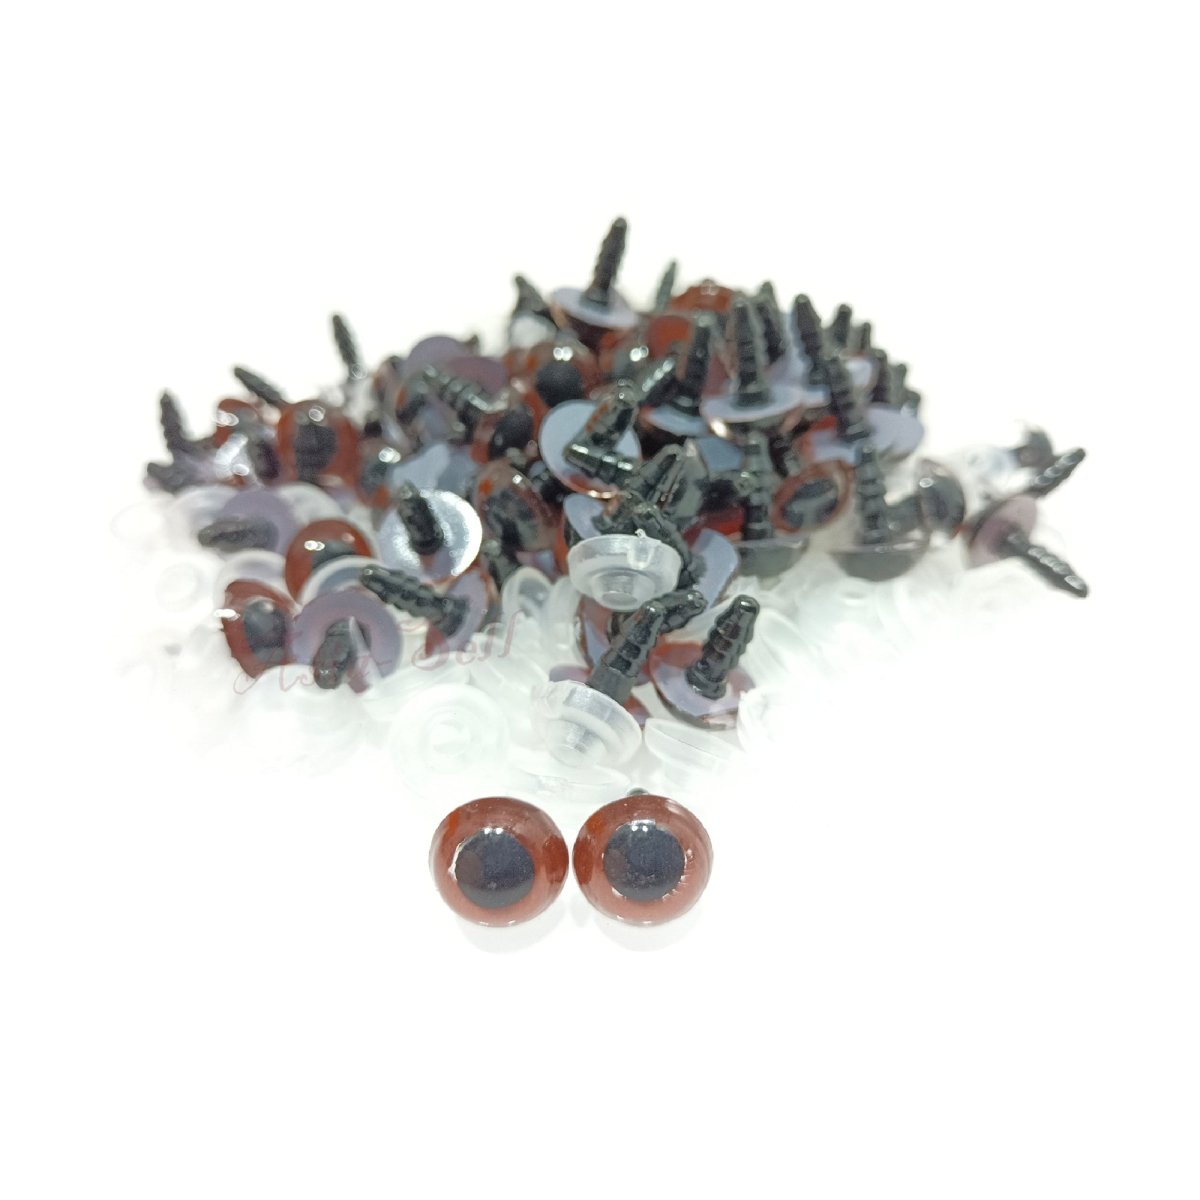 20pcs 10mm Colour Safety Eyes For Teddy Bear Doll Animal Puppet Crafts Plastic Eyes - Dark Brown - - Asia Sell